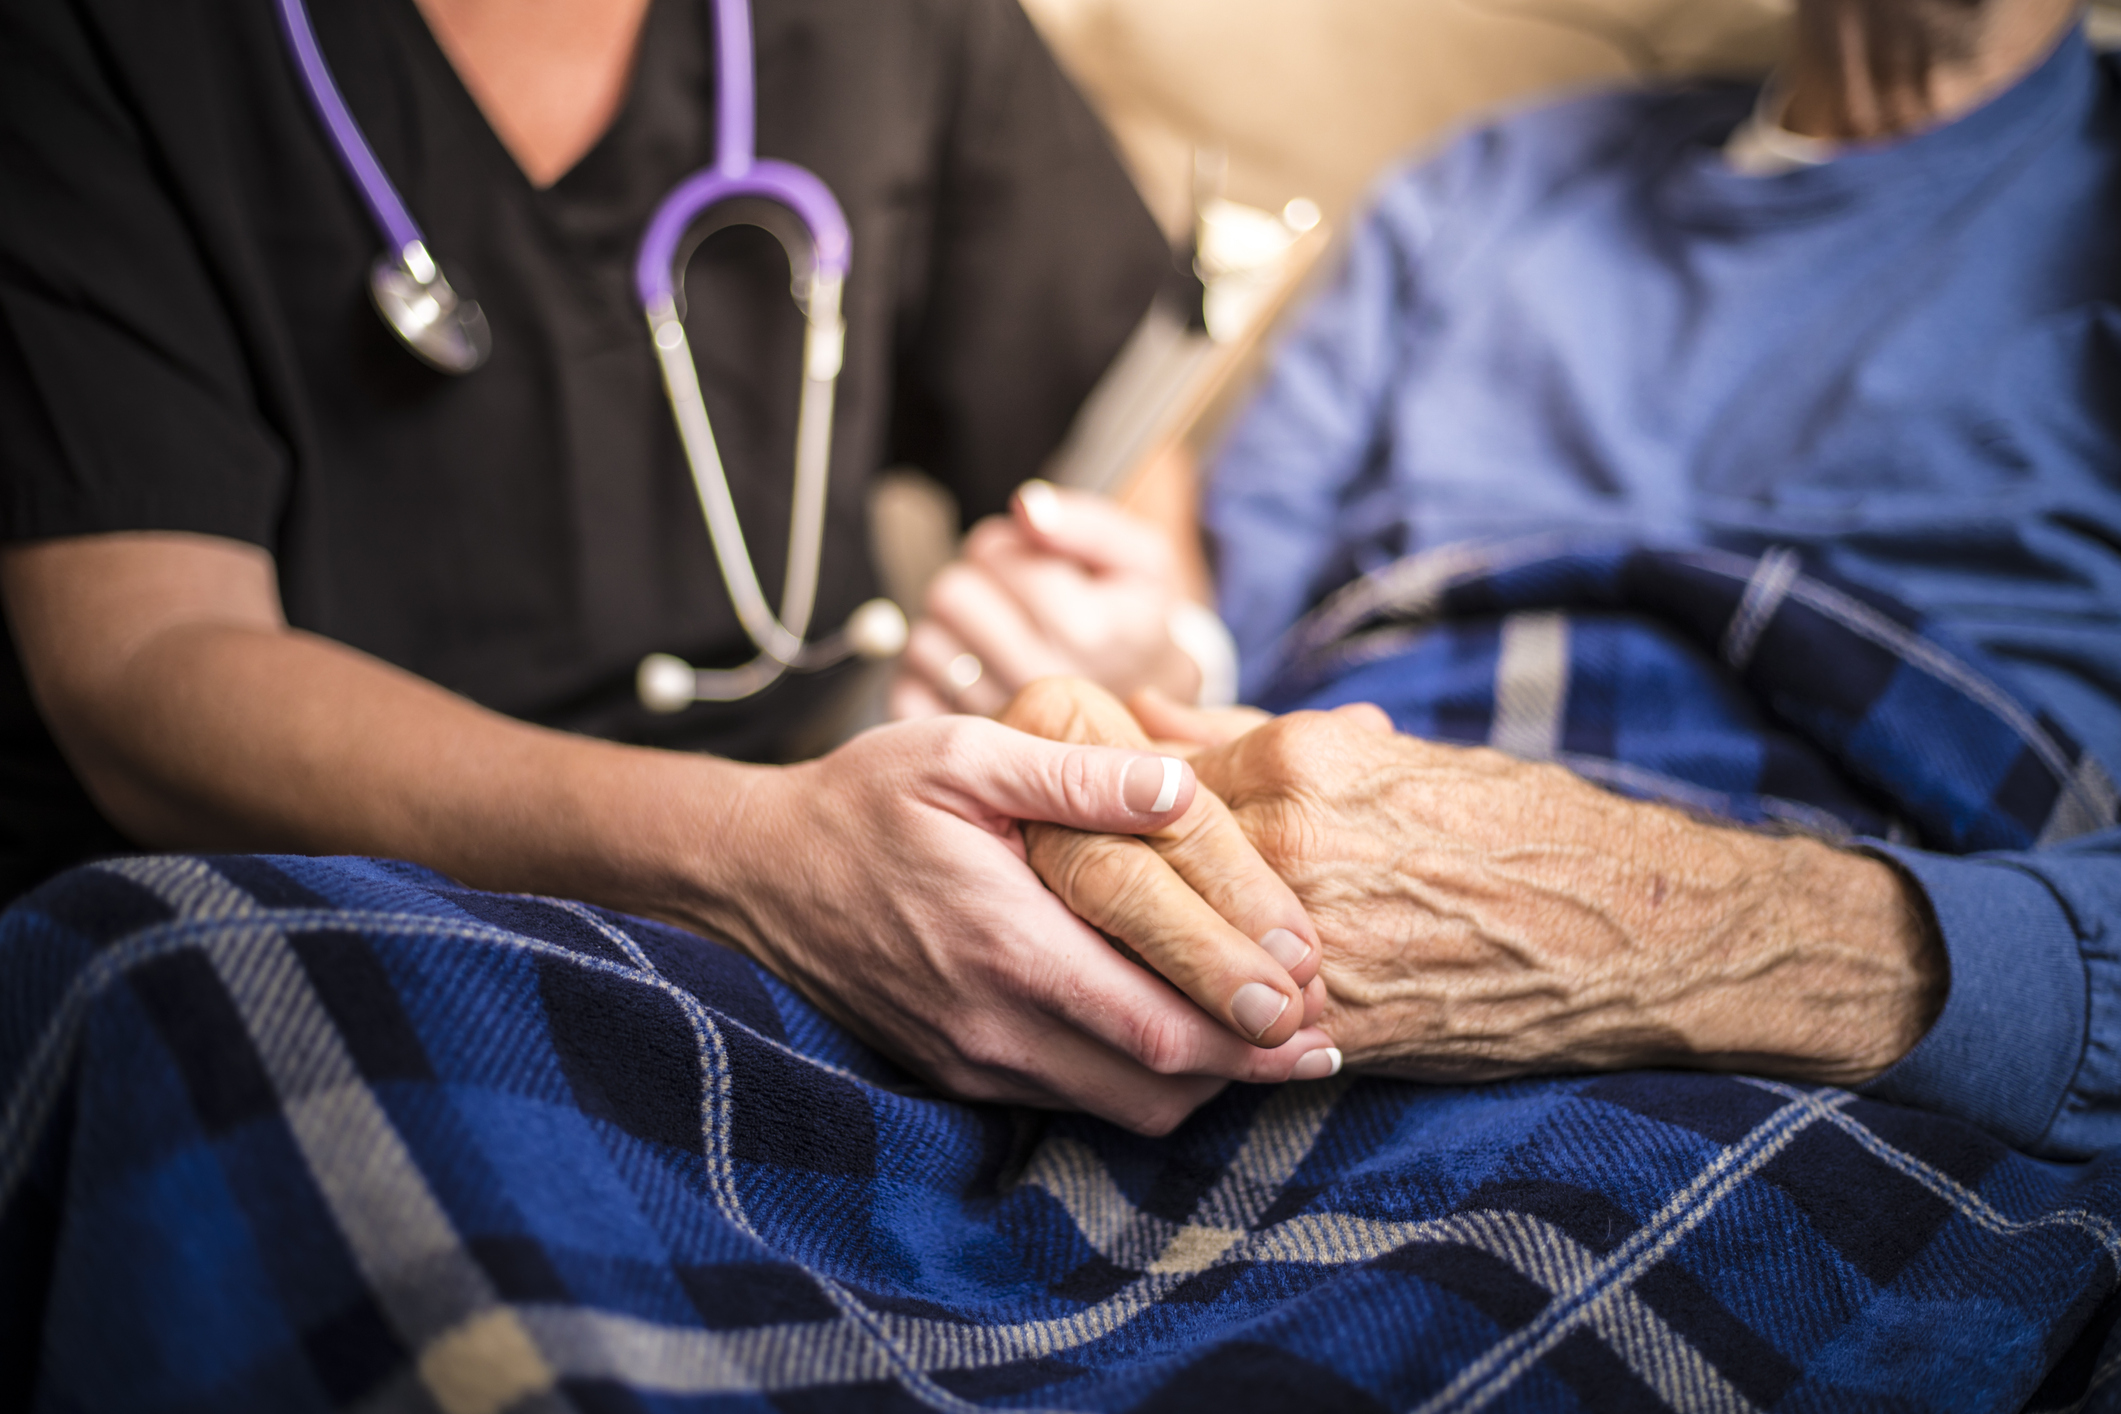 A Nurse visiting an Elderly male patient who is receiving hospice/palliative care